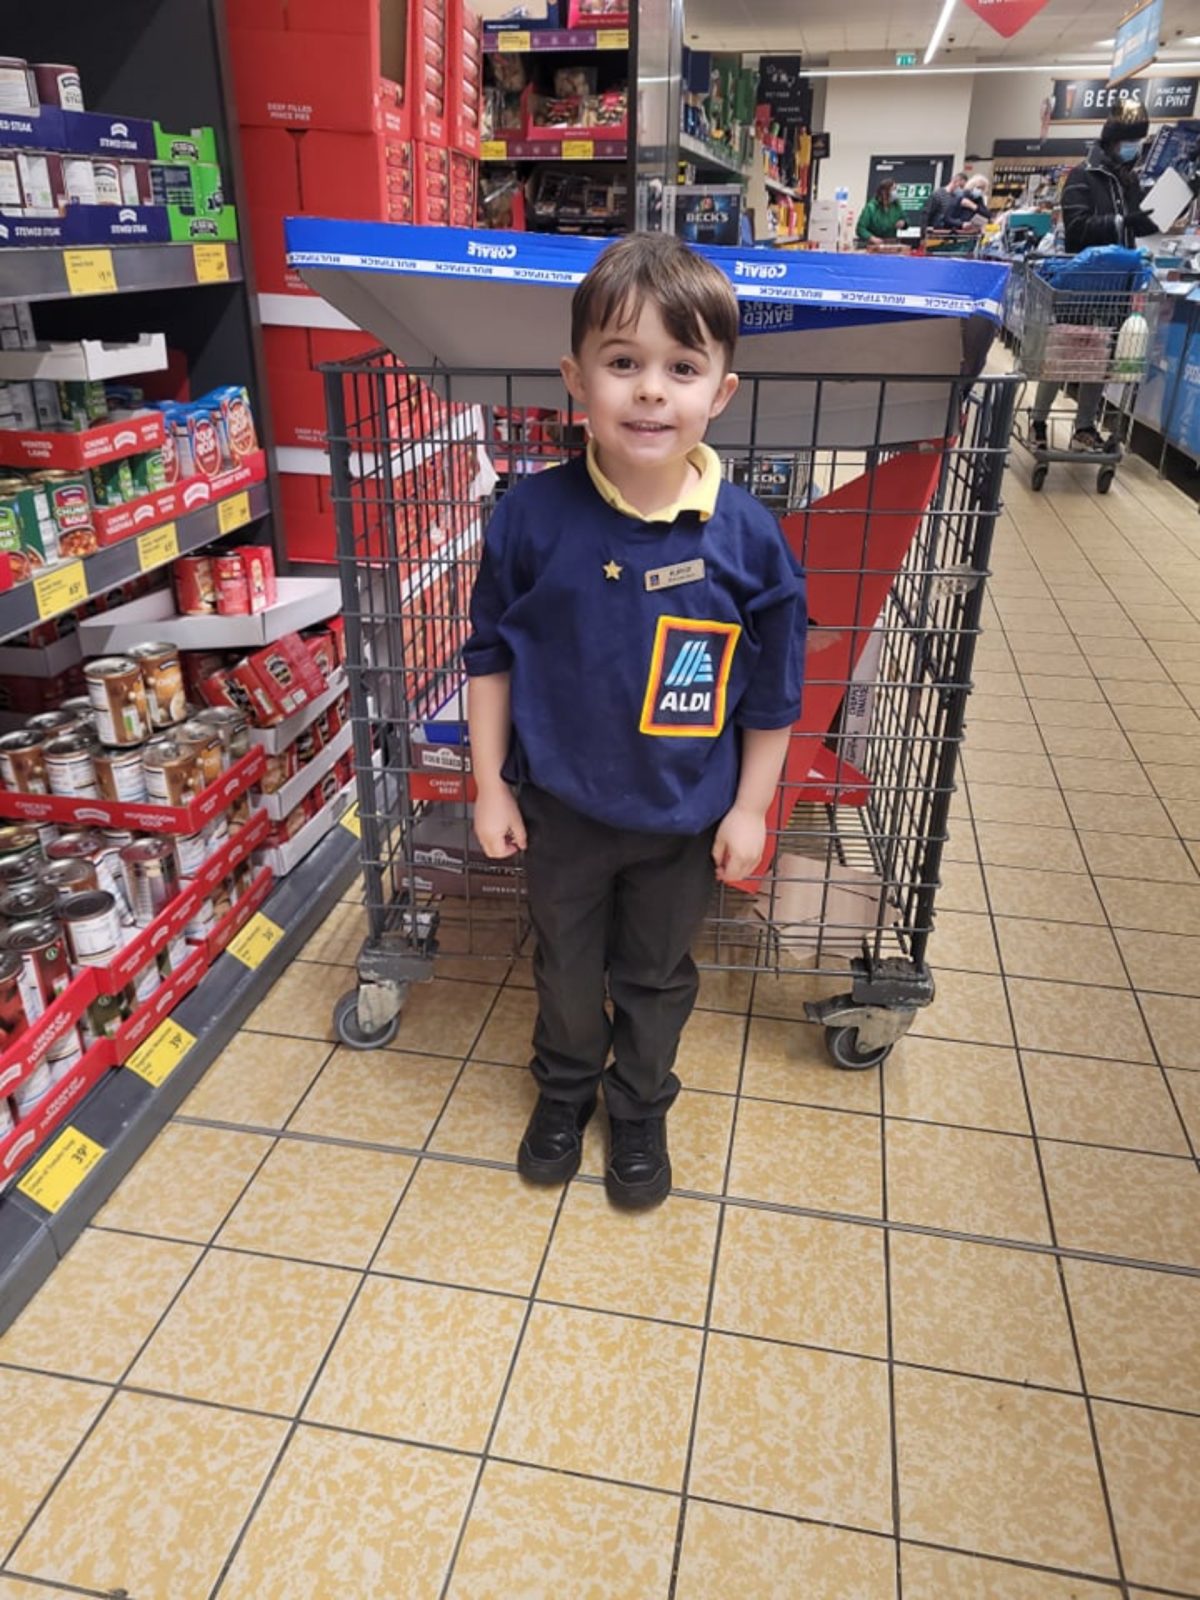 Rupert was invited to Aldi for a day of work